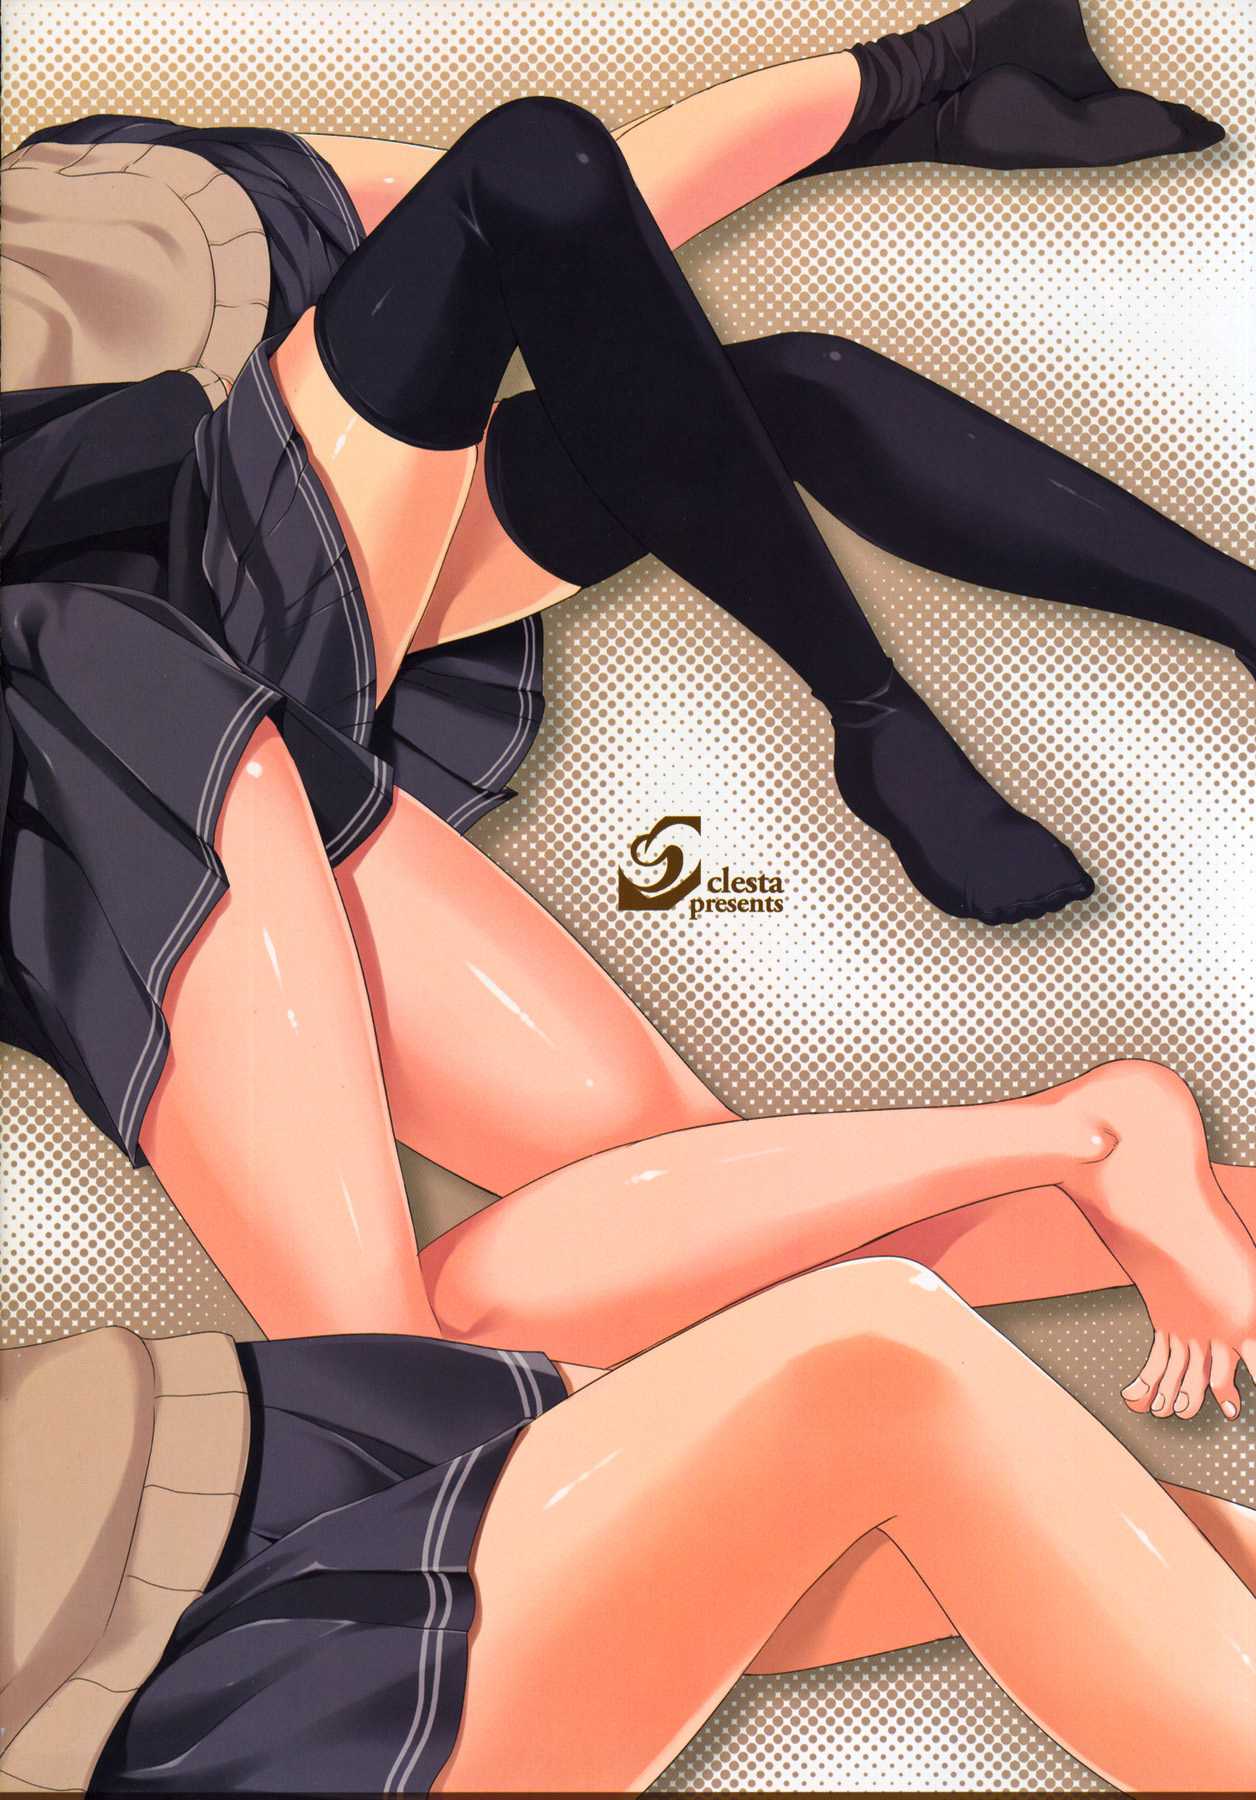 (COMIC1☆3) [Clesta (Cle Masahiro)] CL-orz&#039;4 (Amagami) [Decensored] (COMIC1☆3) [クレスタ (呉マサヒロ)] CL-orz&#039;4 (アマガミ) [無修正]